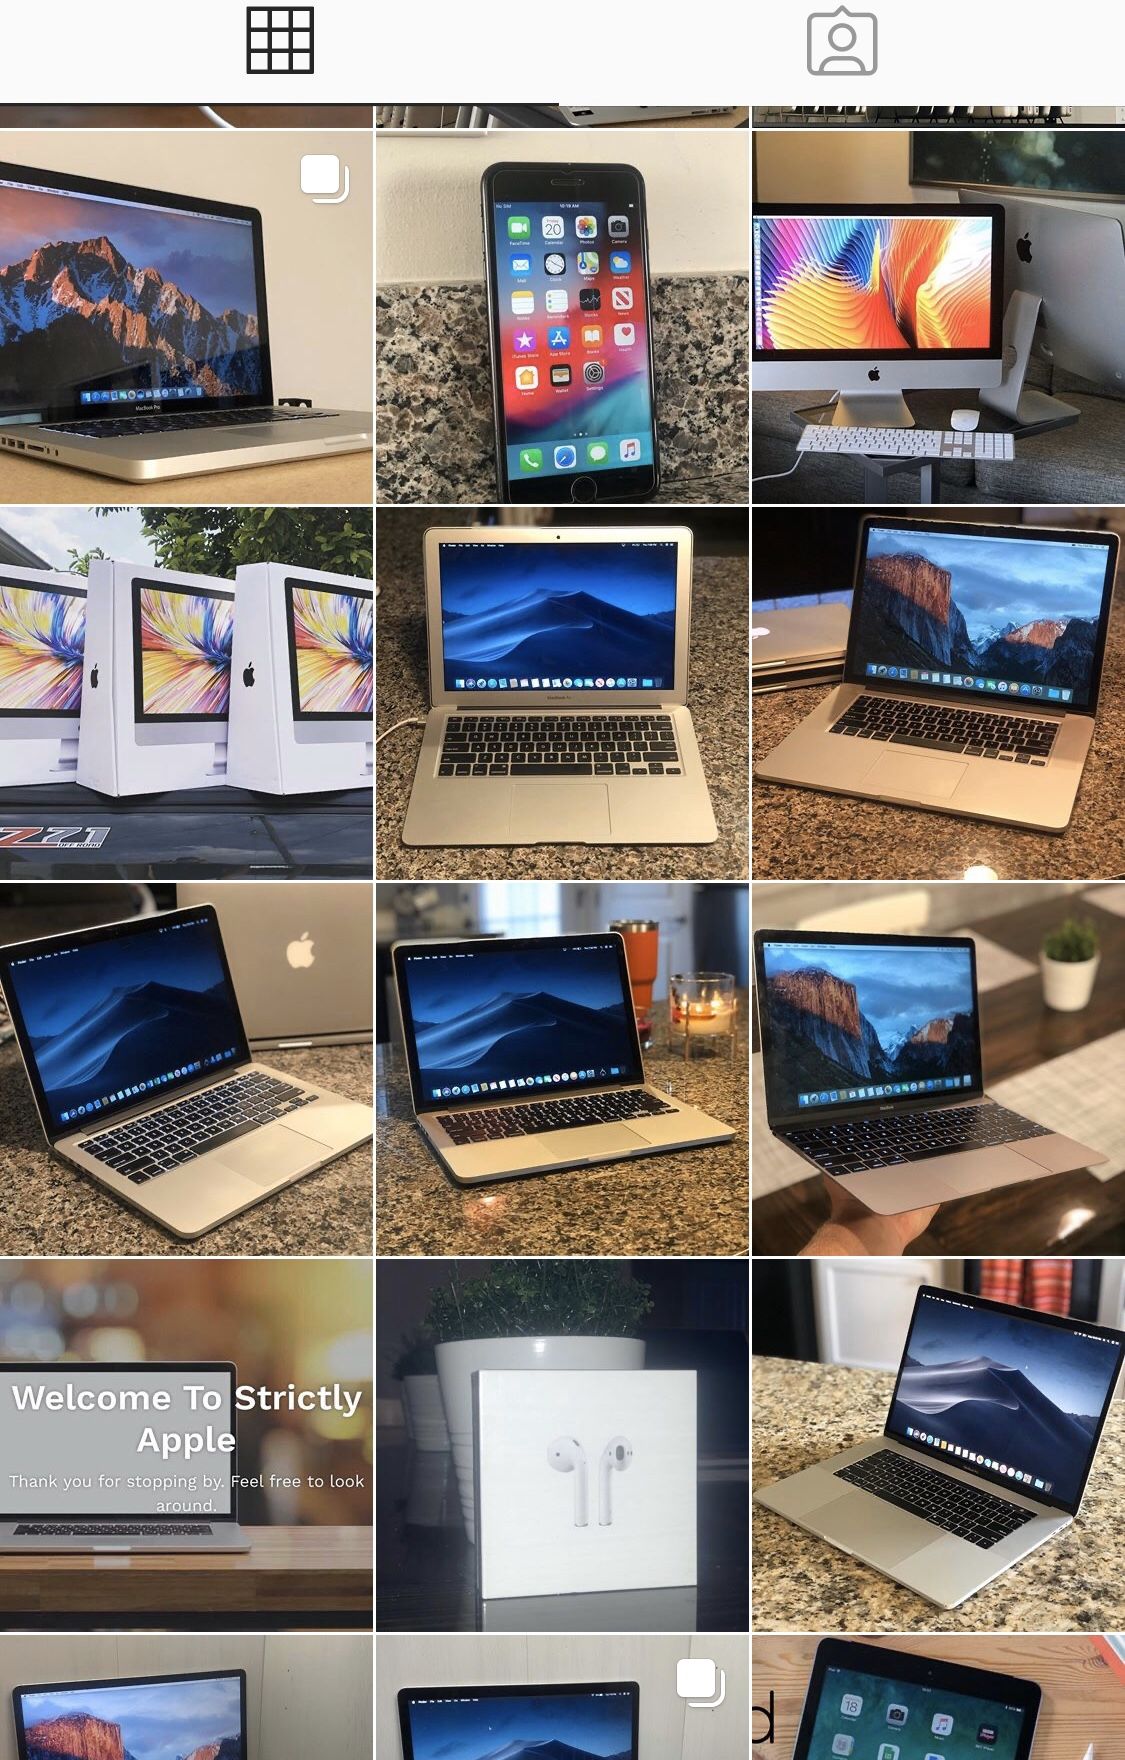 iMacs, macbook pros/airs, iPads, apple watches